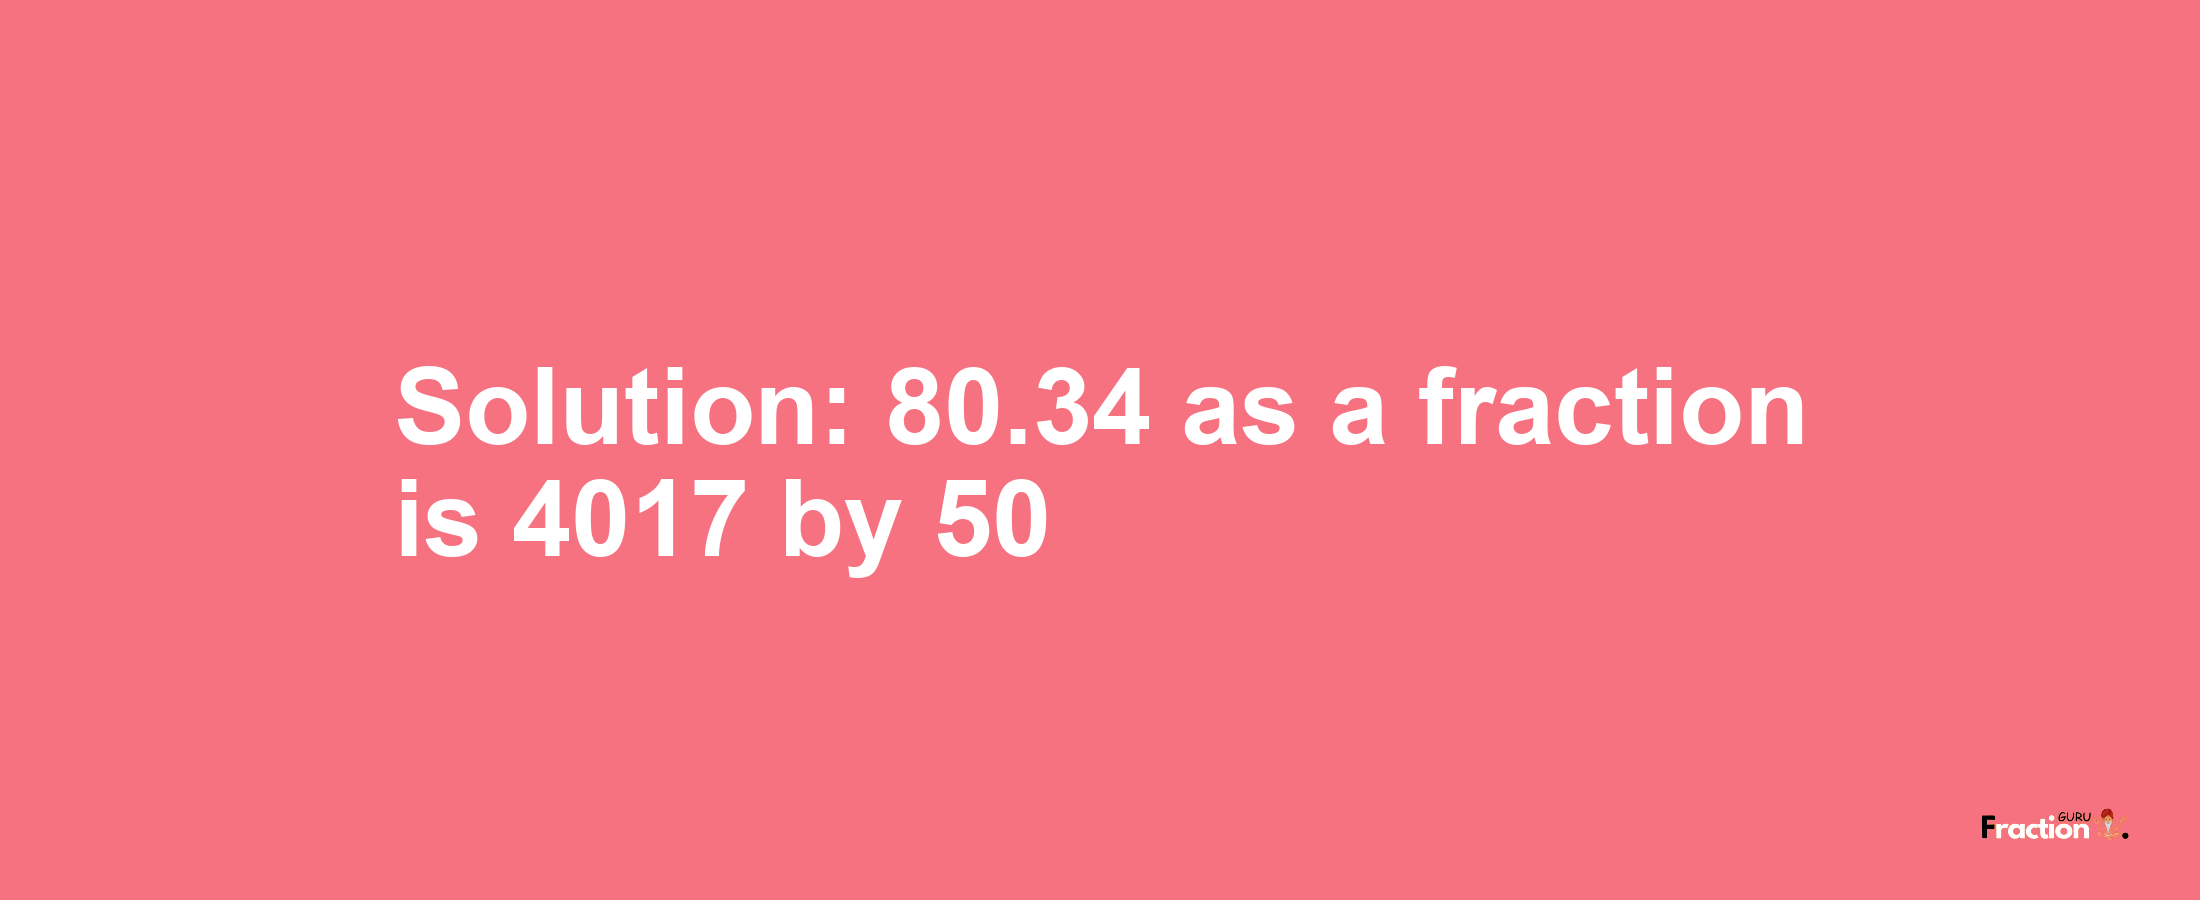 Solution:80.34 as a fraction is 4017/50